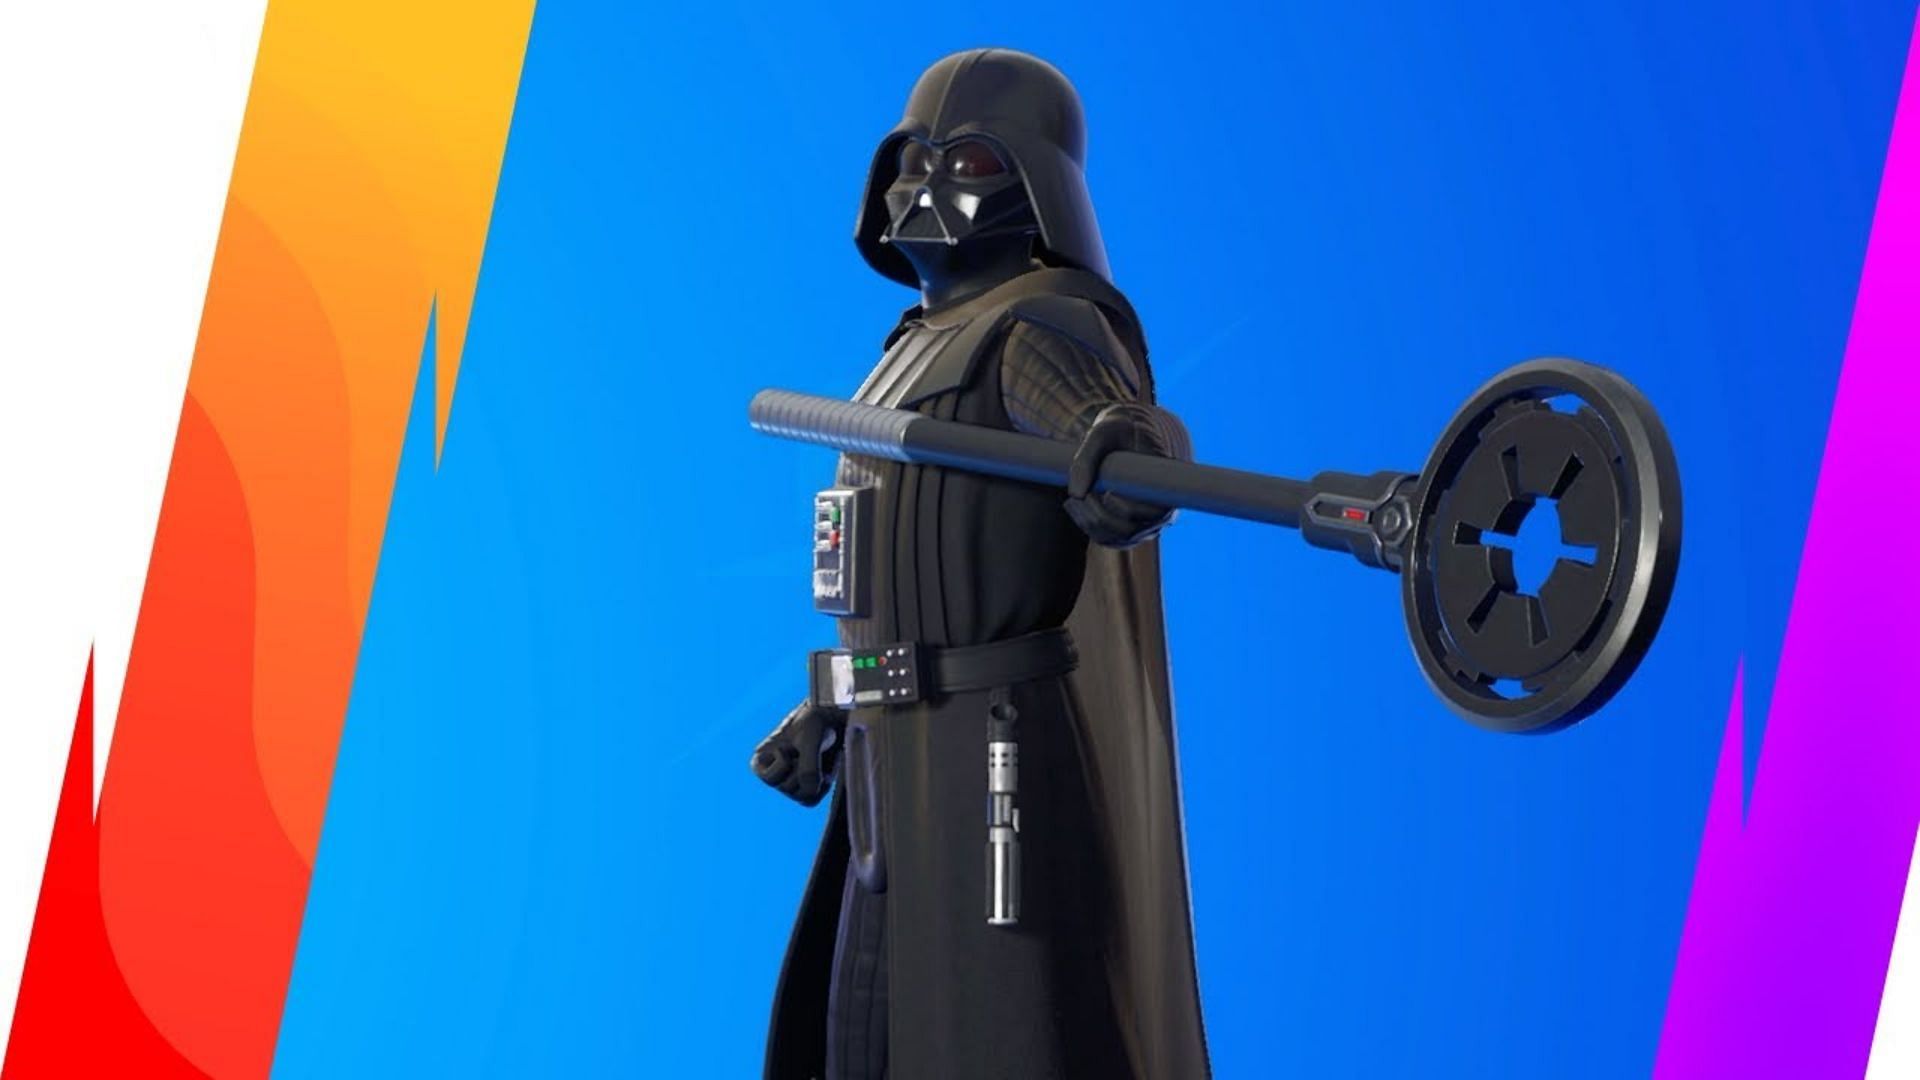 Sigil of the Empire is one of the most disliked Fortnite pickaxes ever released (Image via kbfn.gg / YouTube)